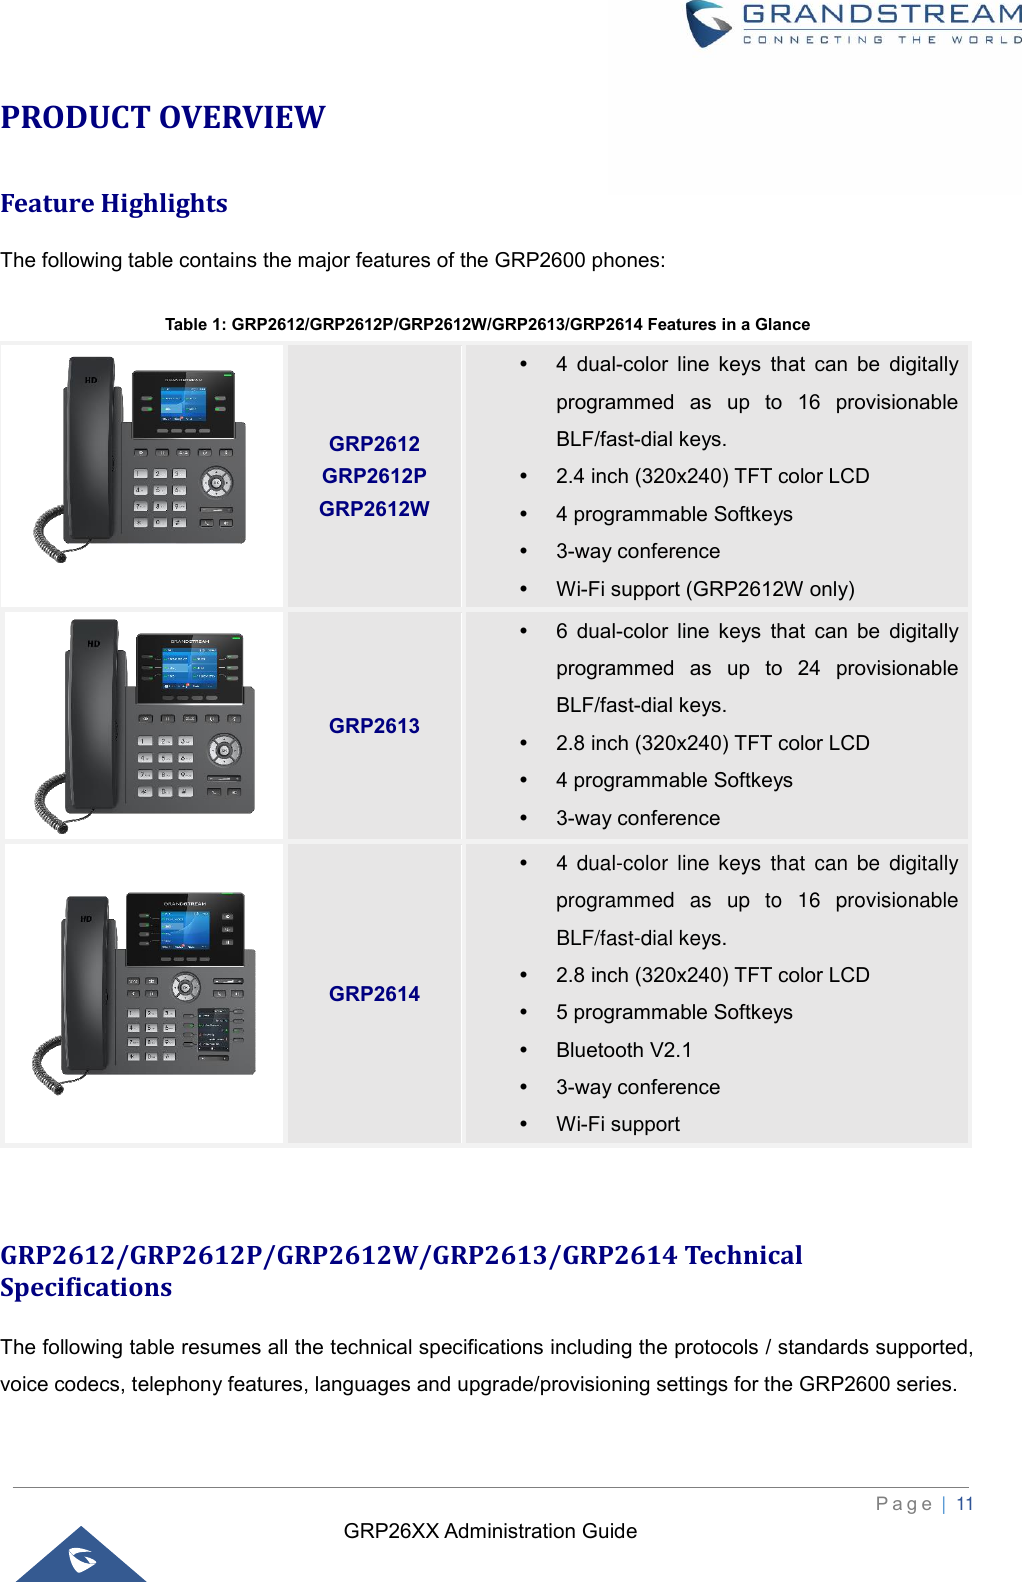 GRP26XX Administration Guide          P a g e  | 11   PRODUCT OVERVIEW Feature Highlights The following table contains the major features of the GRP2600 phones:  Table 1: GRP2612/GRP2612P/GRP2612W/GRP2613/GRP2614 Features in a Glance  GRP2612 GRP2612P GRP2612W  4  dual-color  line  keys  that  can  be  digitally programmed  as  up  to  16  provisionable BLF/fast-dial keys.   2.4 inch (320x240) TFT color LCD  4 programmable Softkeys  3-way conference  Wi-Fi support (GRP2612W only)  GRP2613  6  dual-color  line  keys  that  can  be  digitally programmed  as  up  to  24  provisionable BLF/fast-dial keys.  2.8 inch (320x240) TFT color LCD  4 programmable Softkeys  3-way conference  GRP2614   4 dual-color  line keys that  can be  digitally programmed  as  up  to  16  provisionable BLF/fast-dial keys.    2.8 inch (320x240) TFT color LCD  5 programmable Softkeys  Bluetooth V2.1  3-way conference  Wi-Fi support   GRP2612/GRP2612P/GRP2612W/GRP2613/GRP2614 Technical Specifications The following table resumes all the technical specifications including the protocols / standards supported, voice codecs, telephony features, languages and upgrade/provisioning settings for the GRP2600 series.  